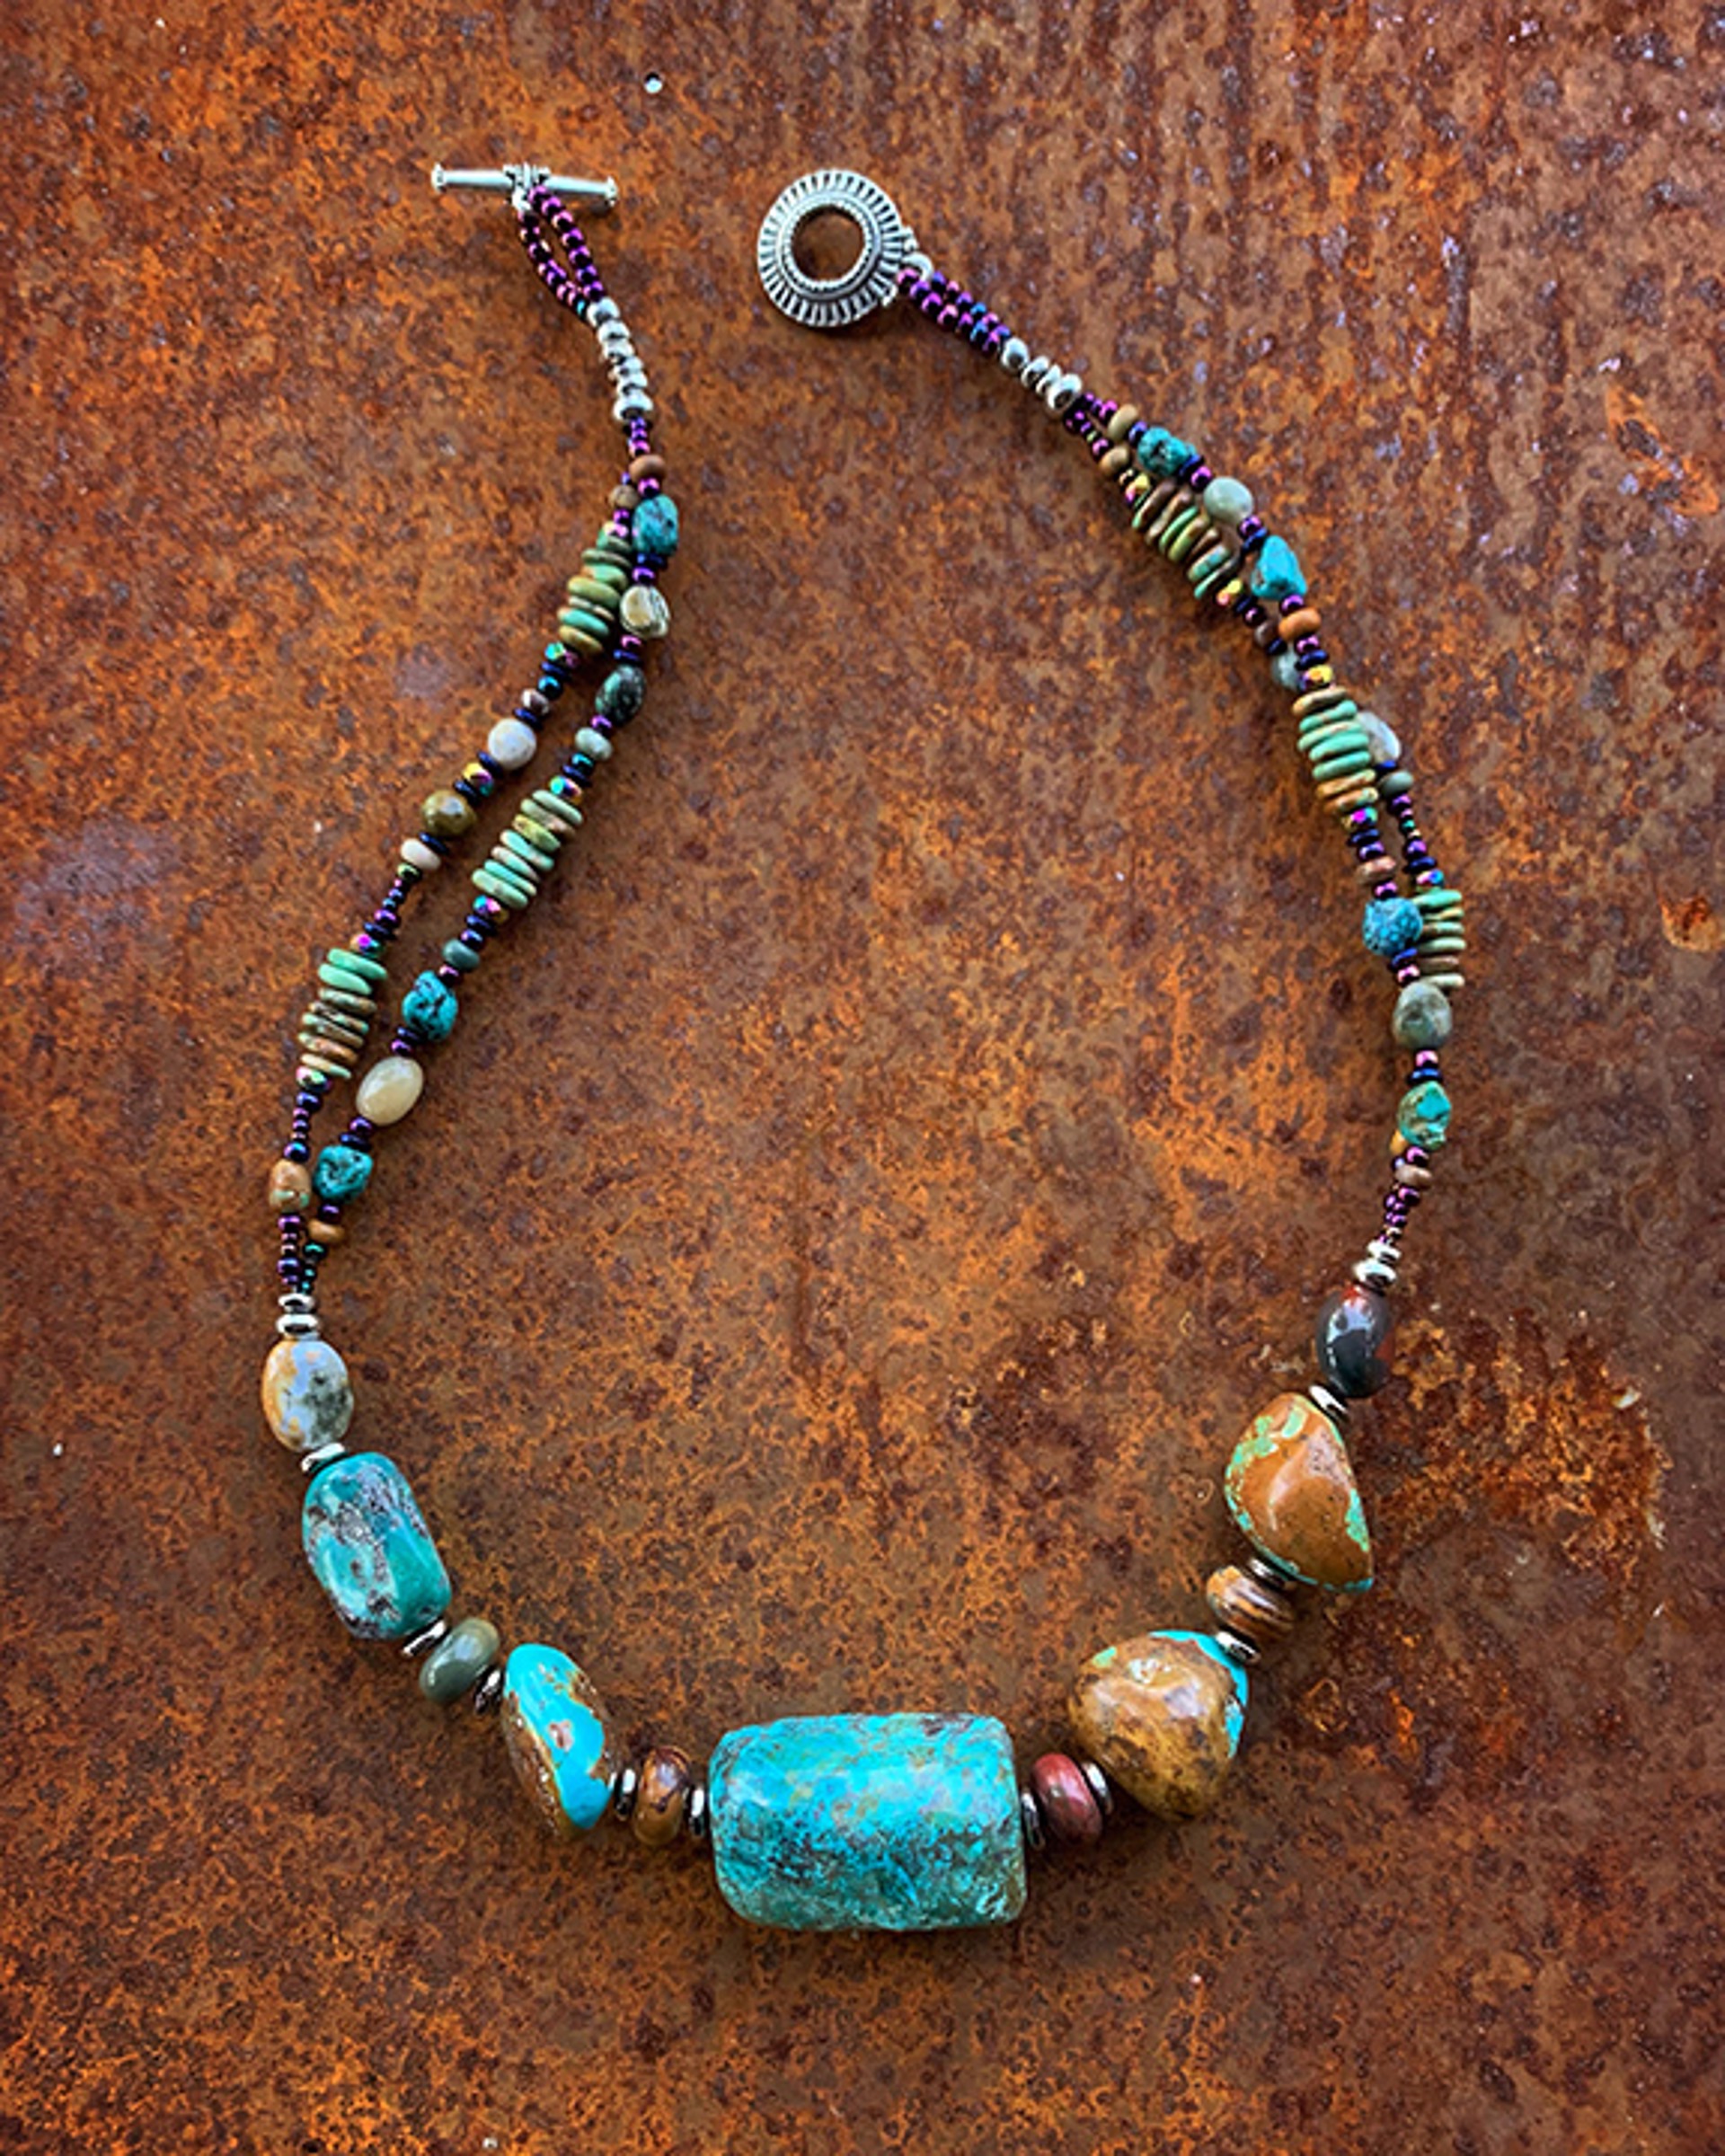 733	Chunky Turquoise Necklace by Kelly Ormsby